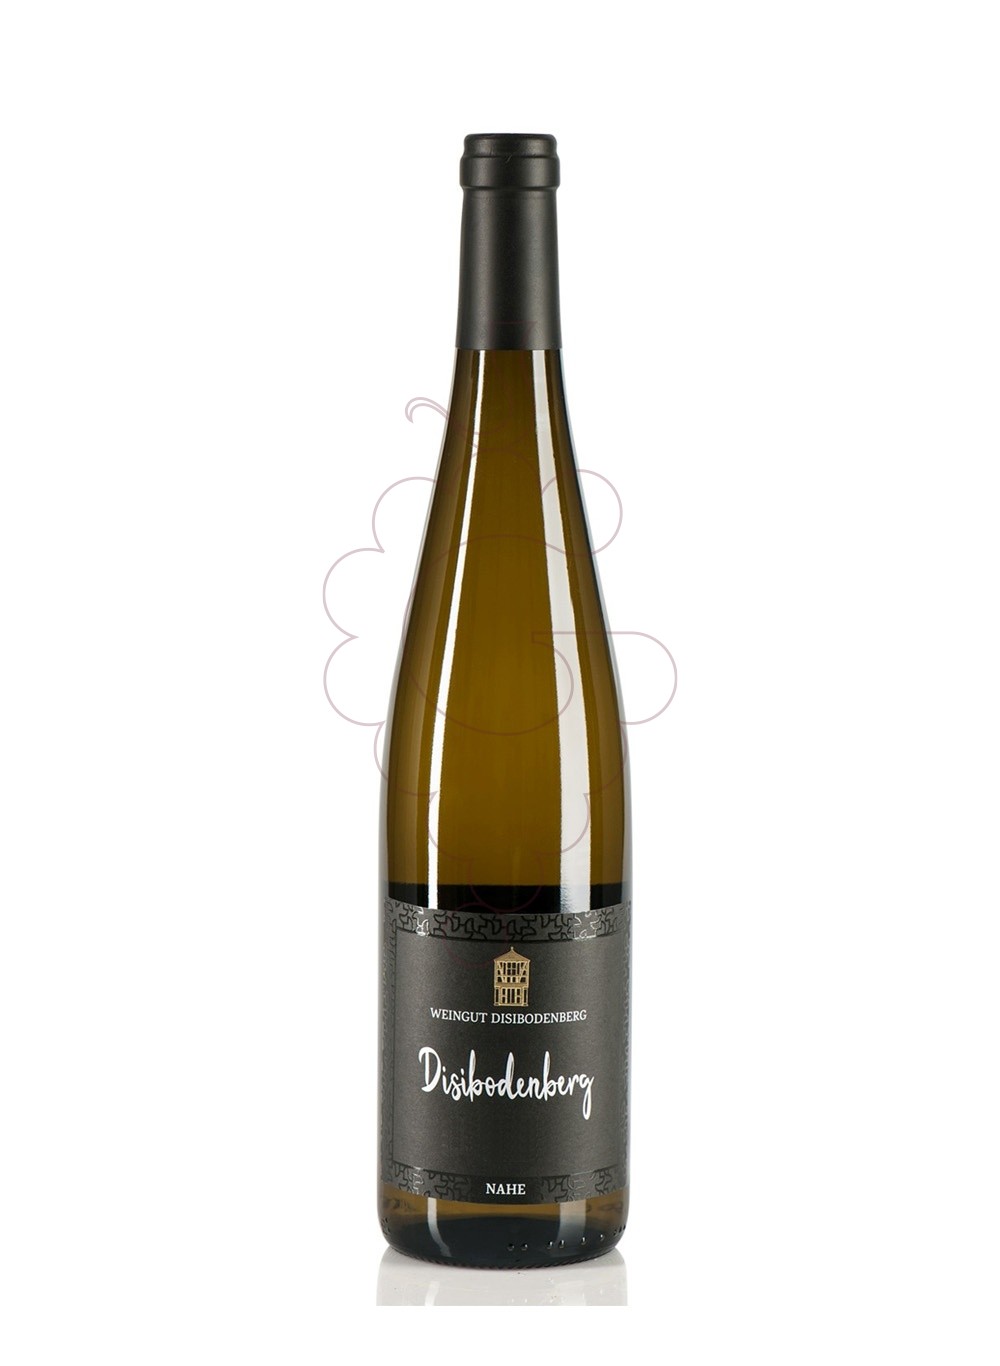 Photo Disibodenberg Riesling Auslese white wine